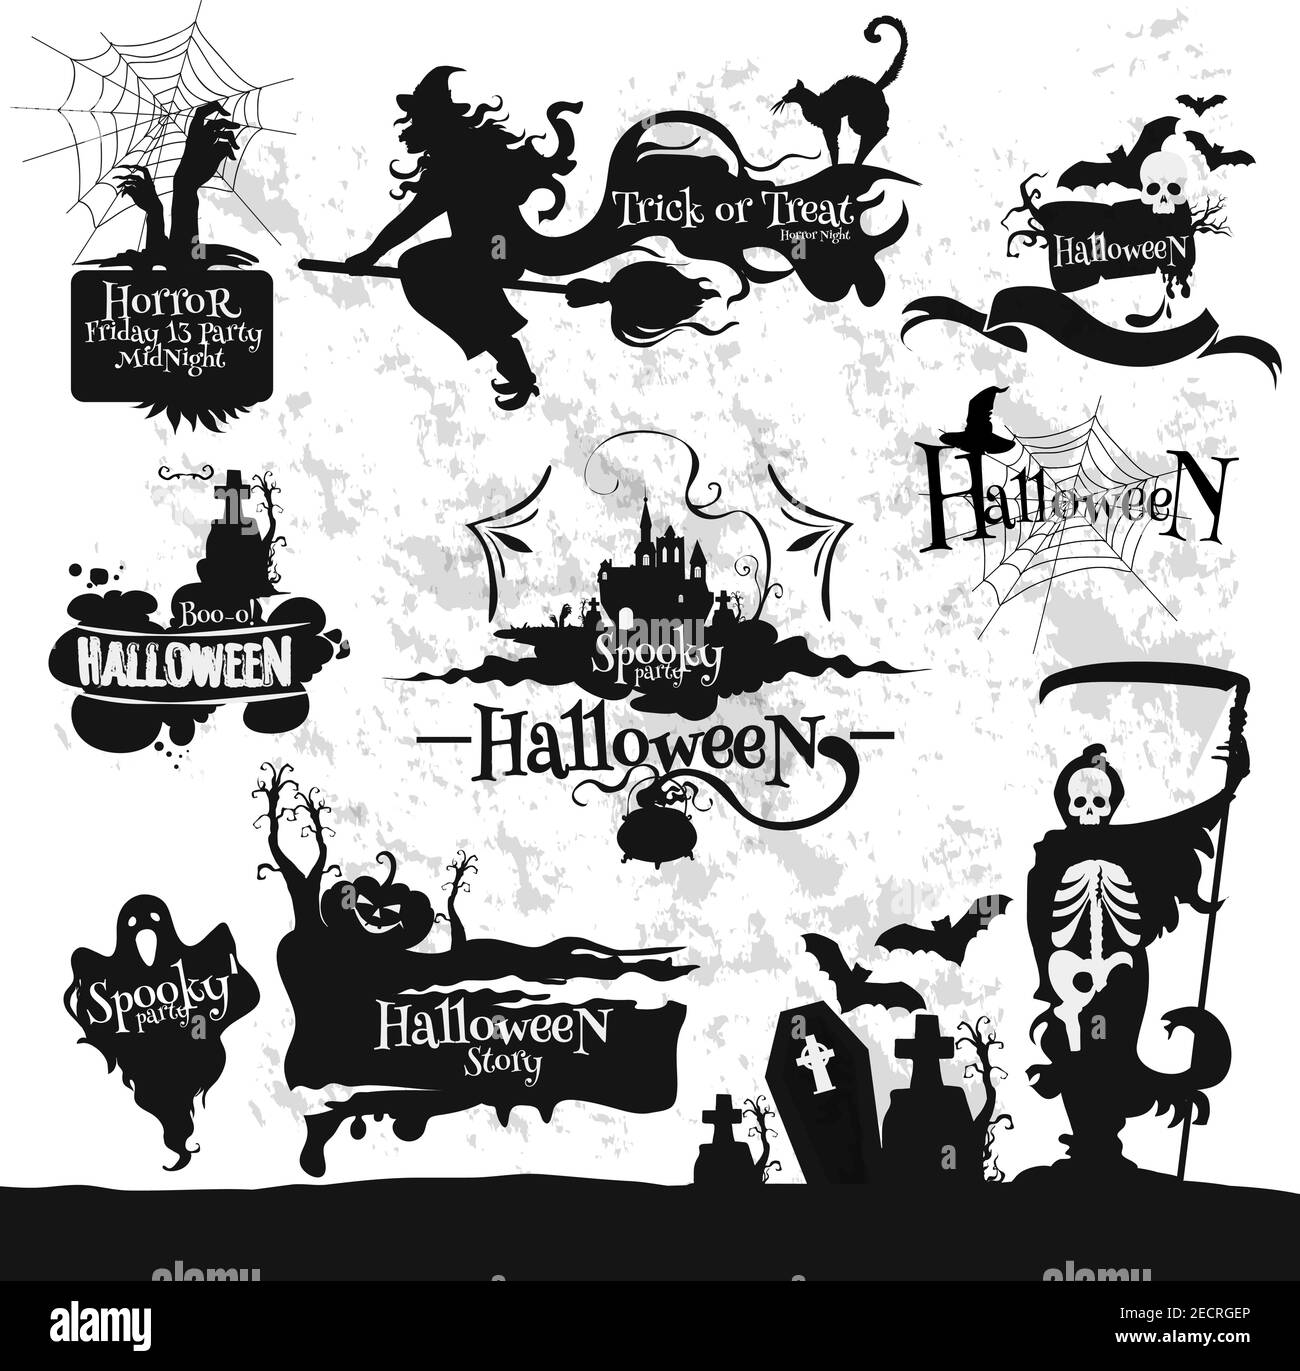 Decoration emblems and icons set for Halloween party, Friday 13 horror midnight. Witch broom, spooky ghost, spider, skeleton scythe, graveyard, haunte Stock Vector